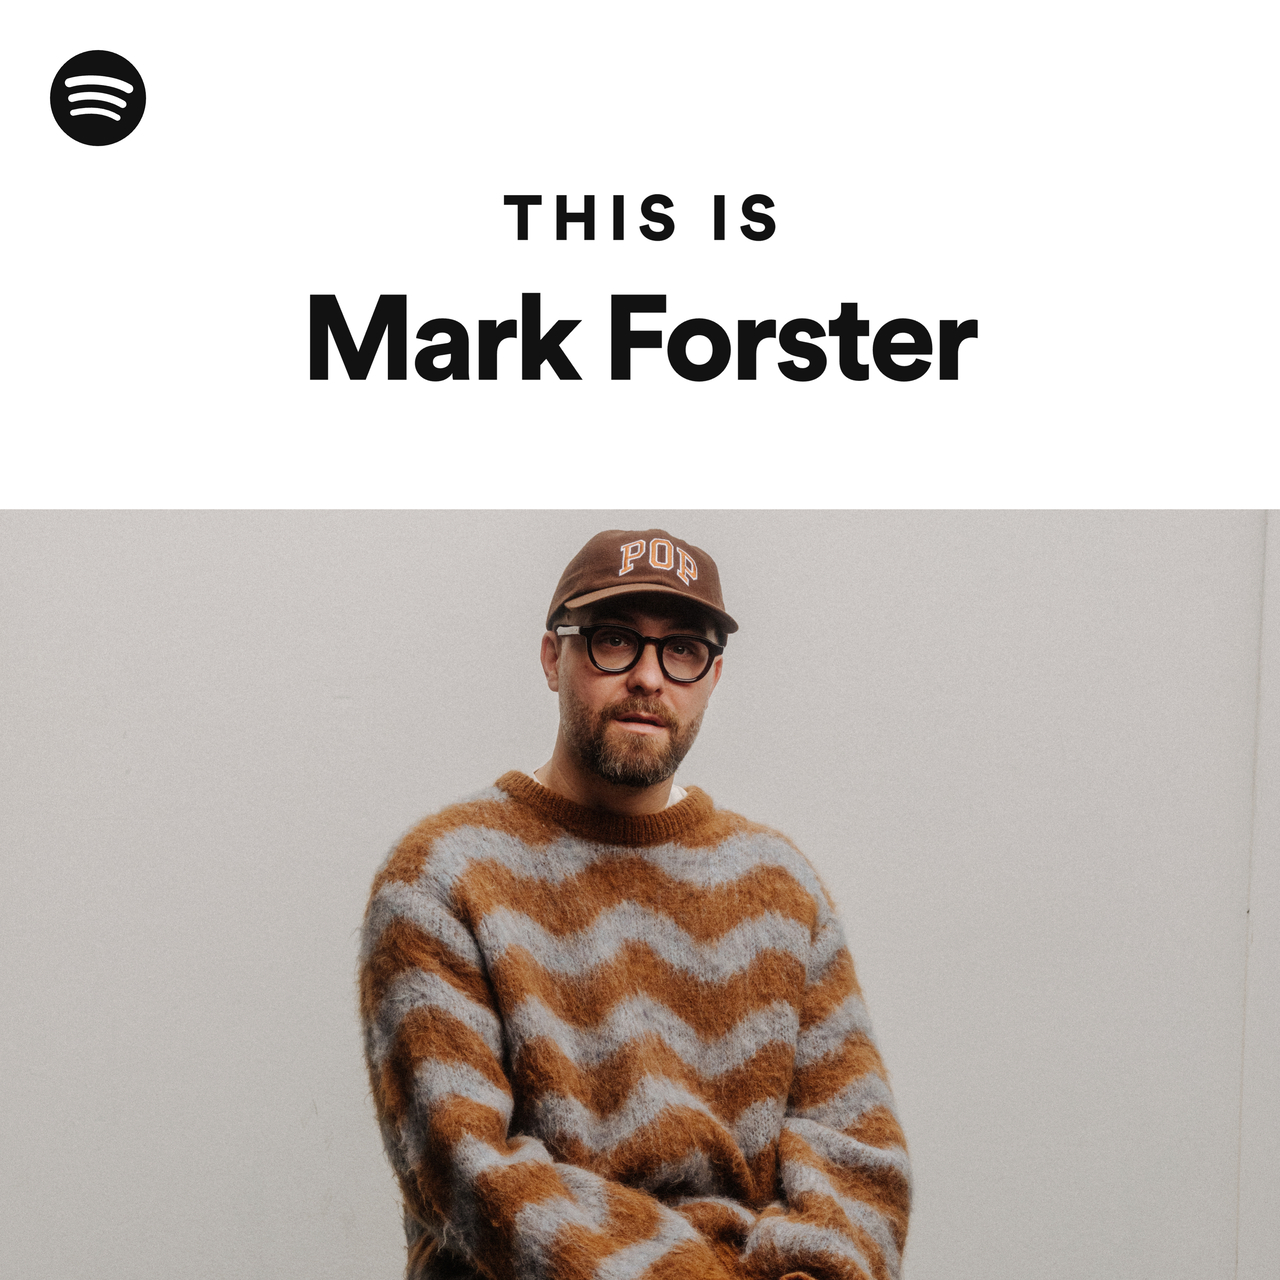 This Is Mark Forster - playlist by Spotify